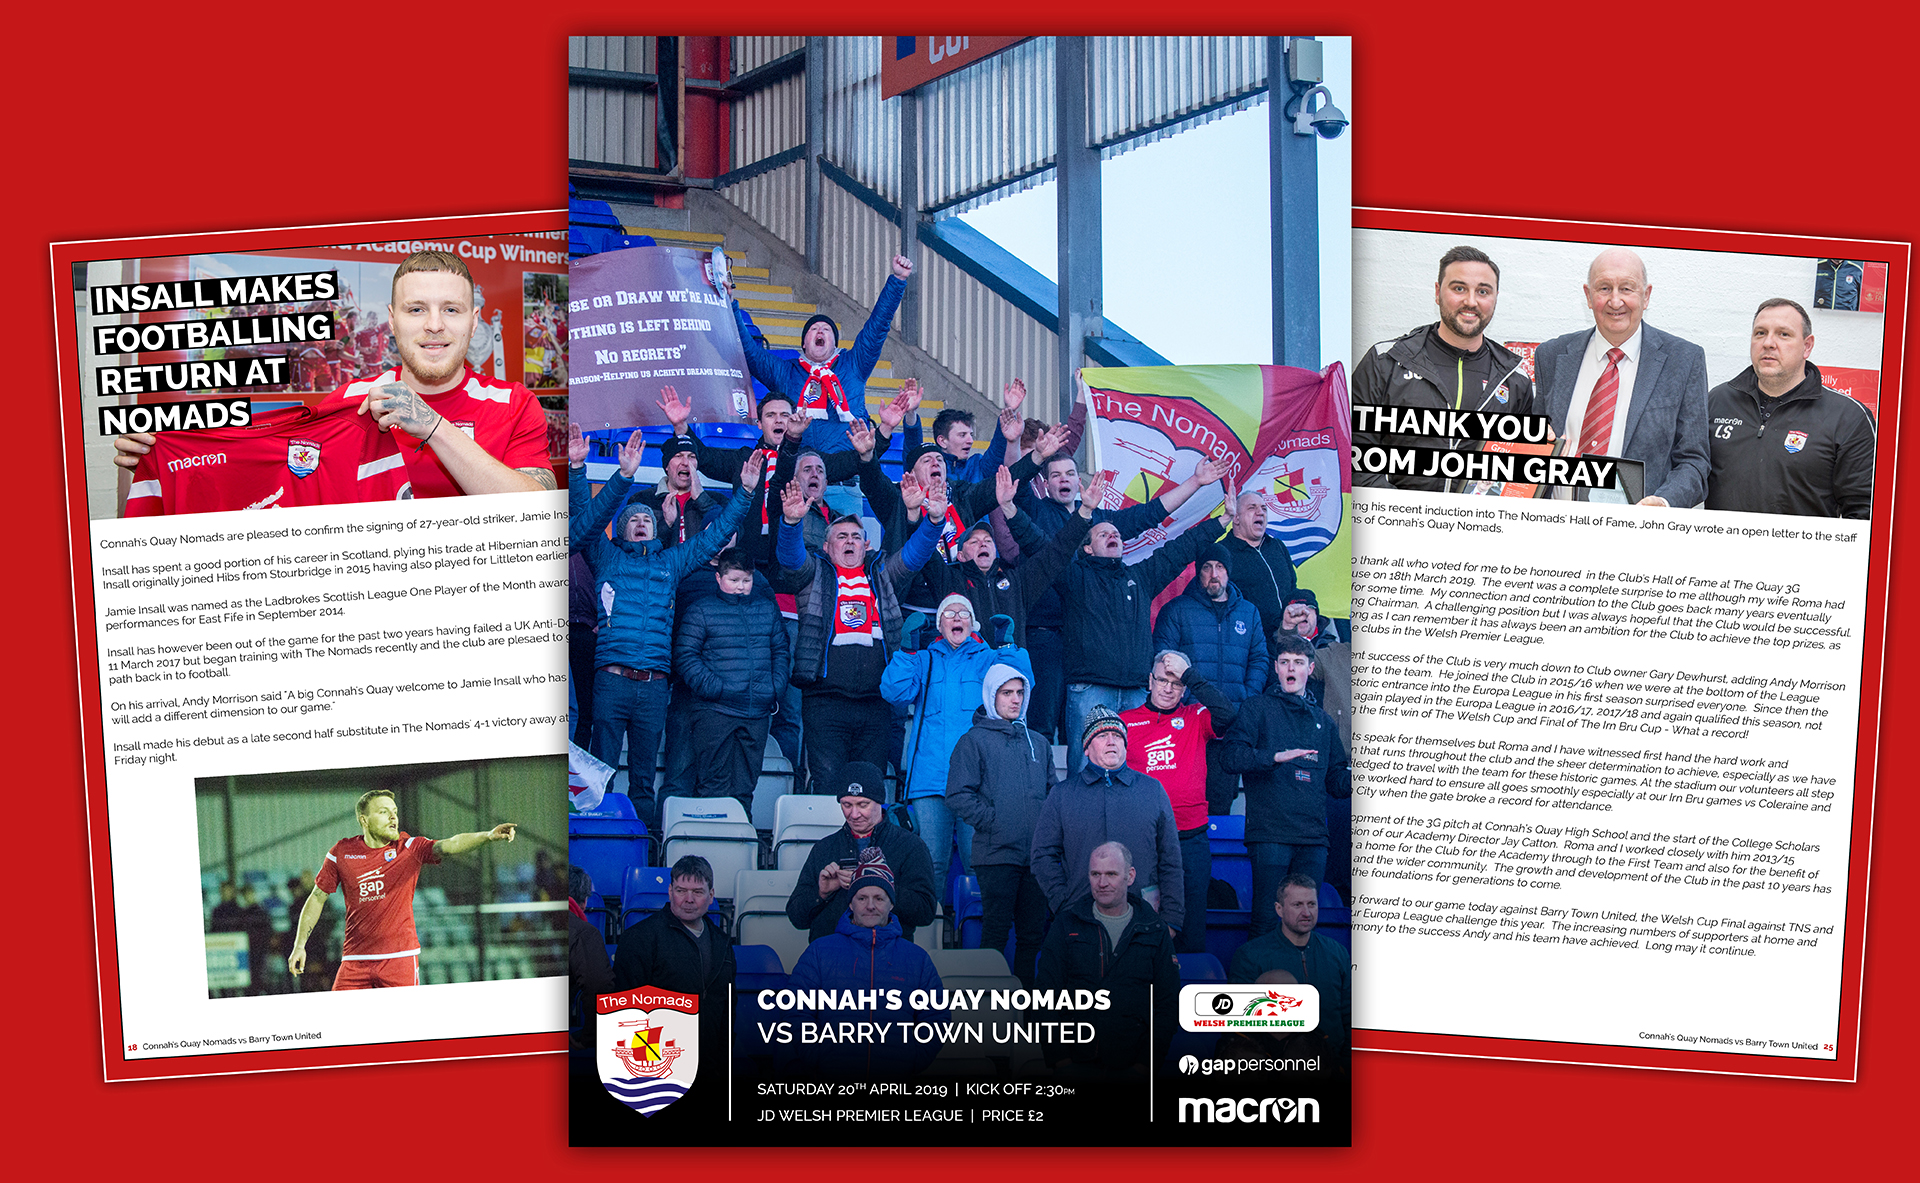 Connah's Quay Nomads vs Barry Town United Digital Match Programme